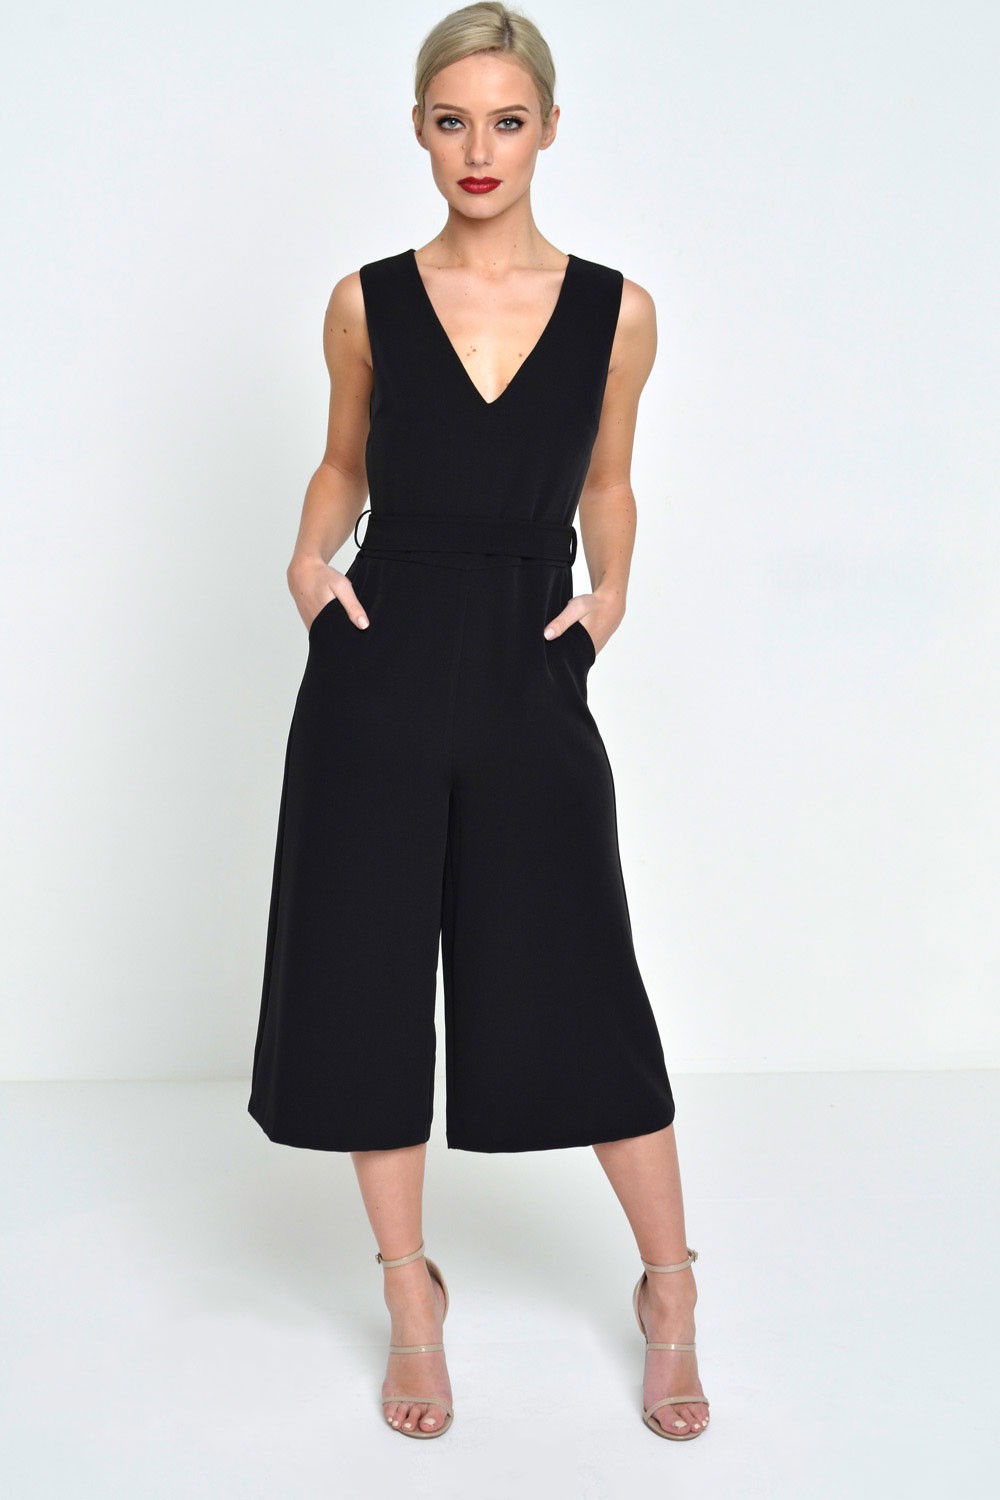 iCLOTHING Donna Culotte Jumpsuit in Black | iCLOTHING